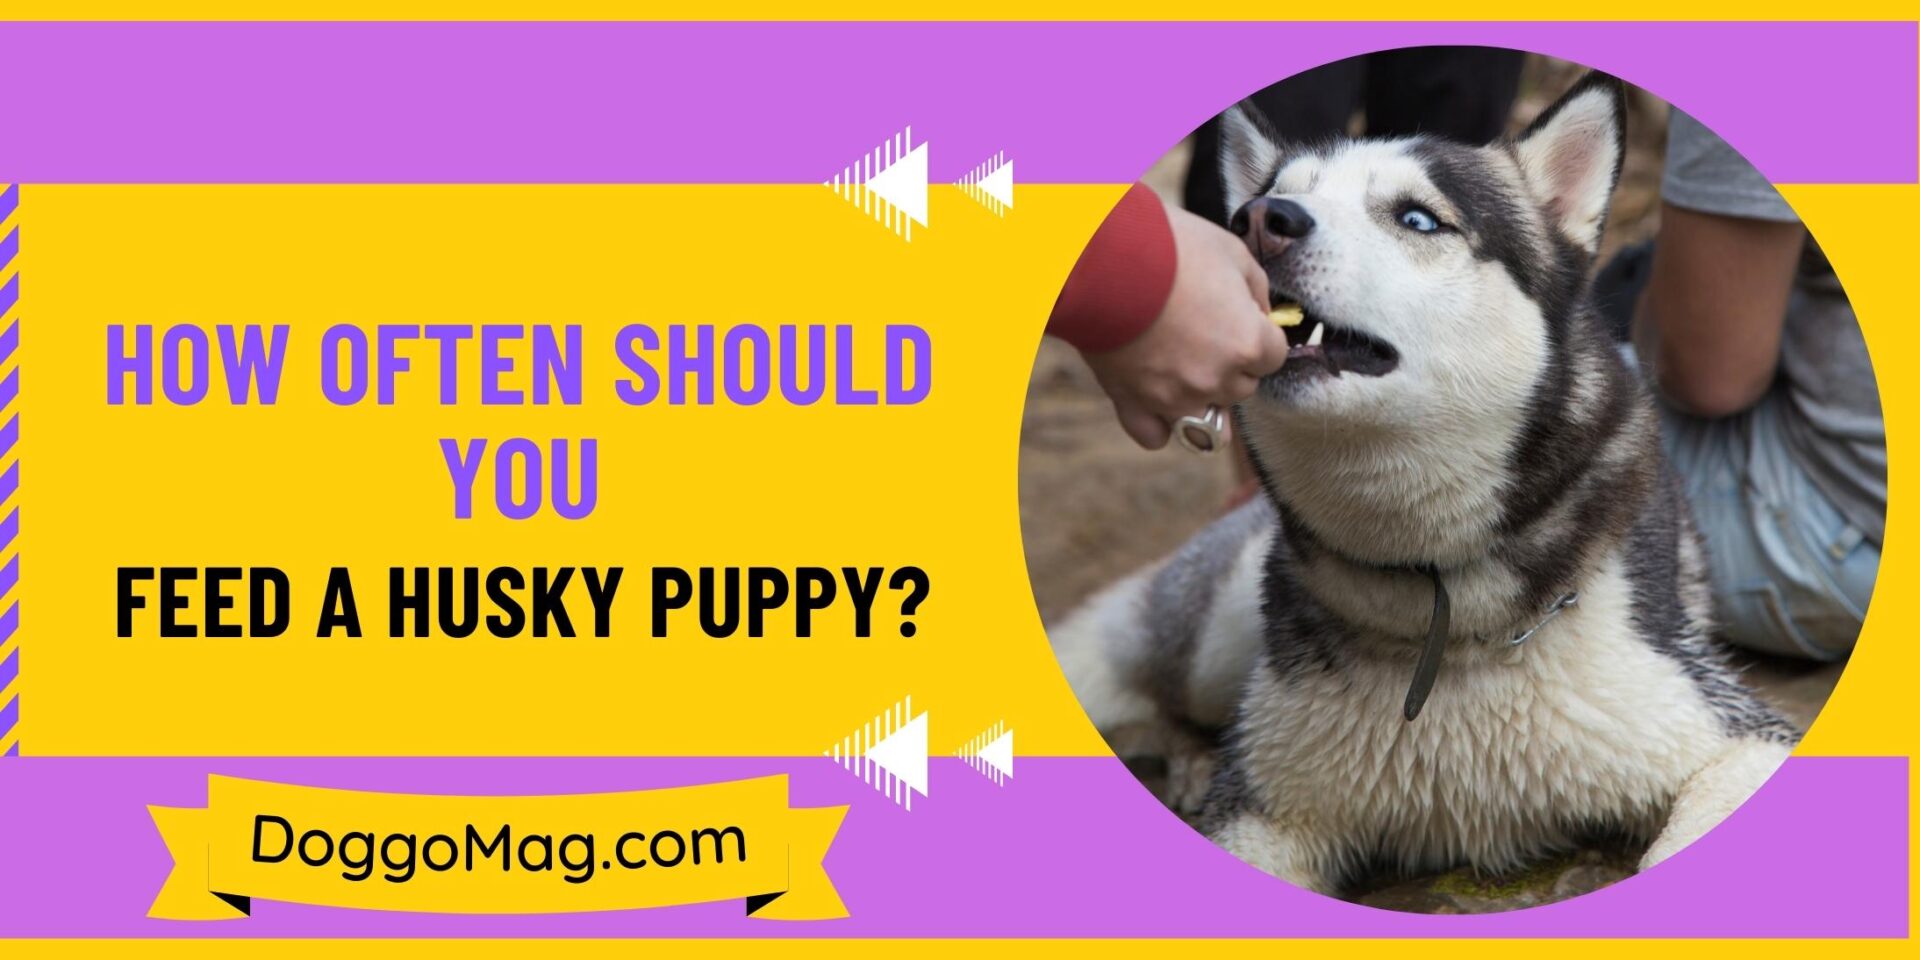 How Often Should You Feed a Husky Puppy